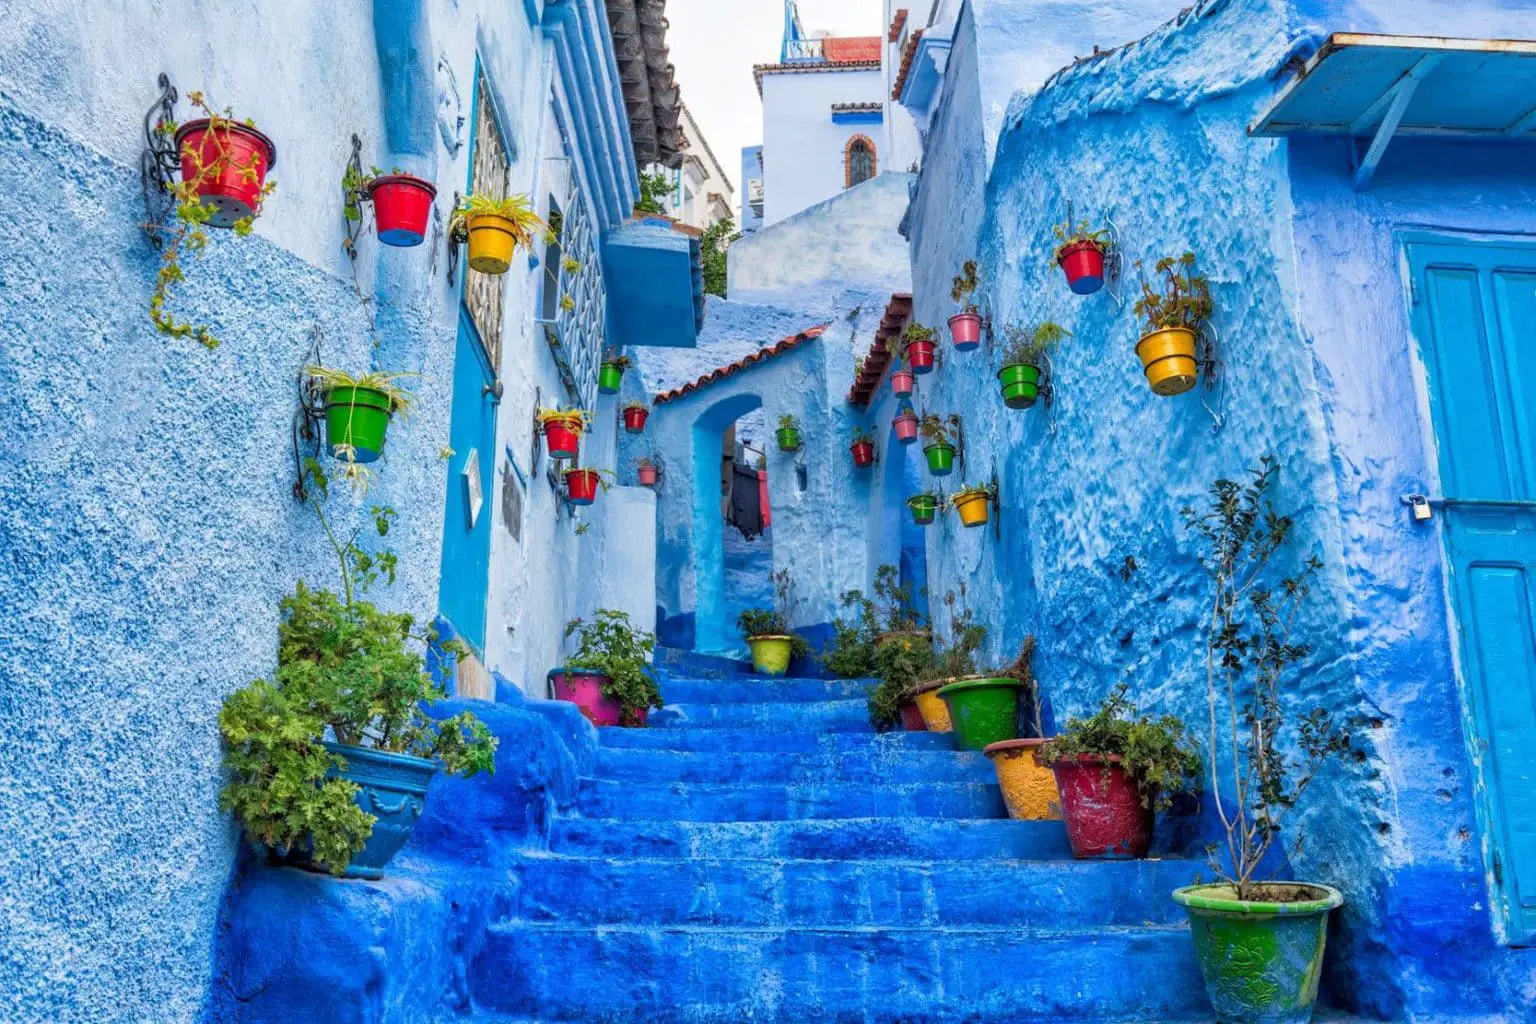 One week in Morocco - Chefchaouen